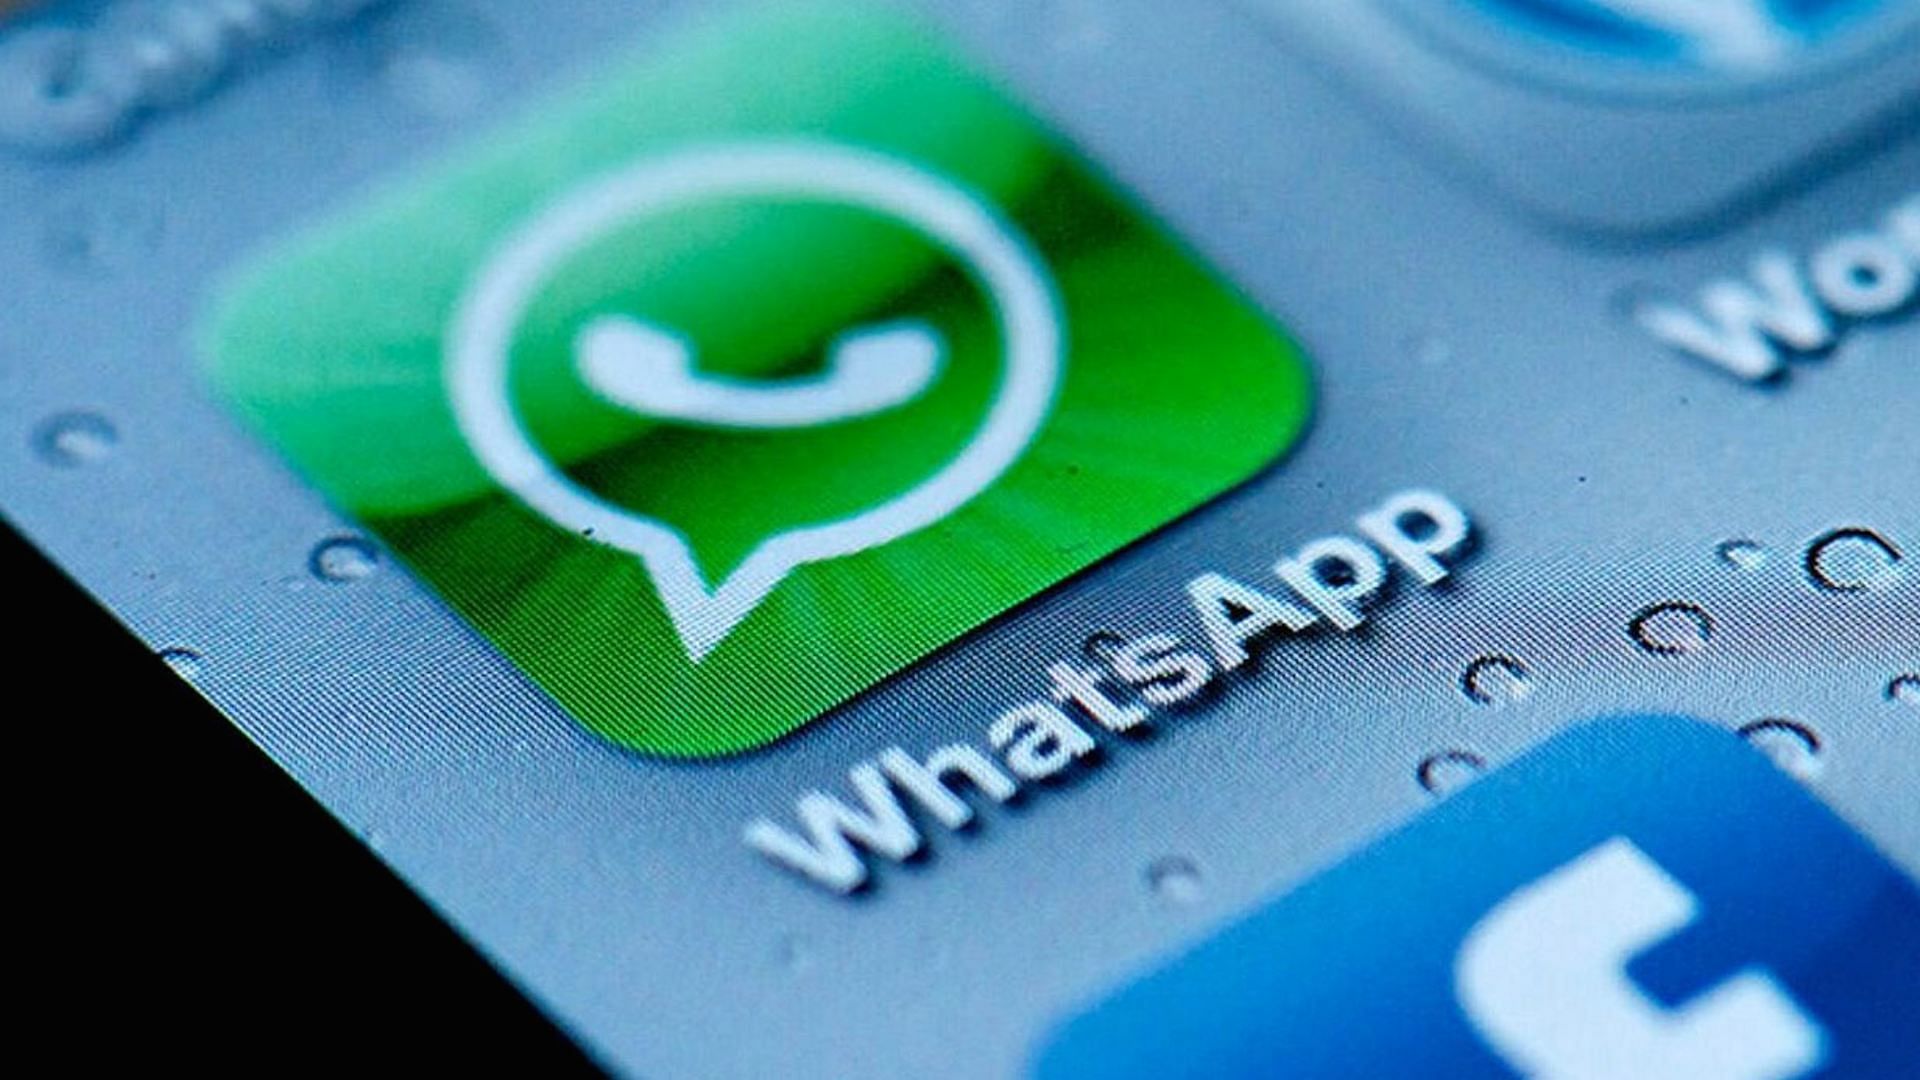 WhatsApp on iOS could let users have a listen to audio&nbsp; messages in the notifications bar.